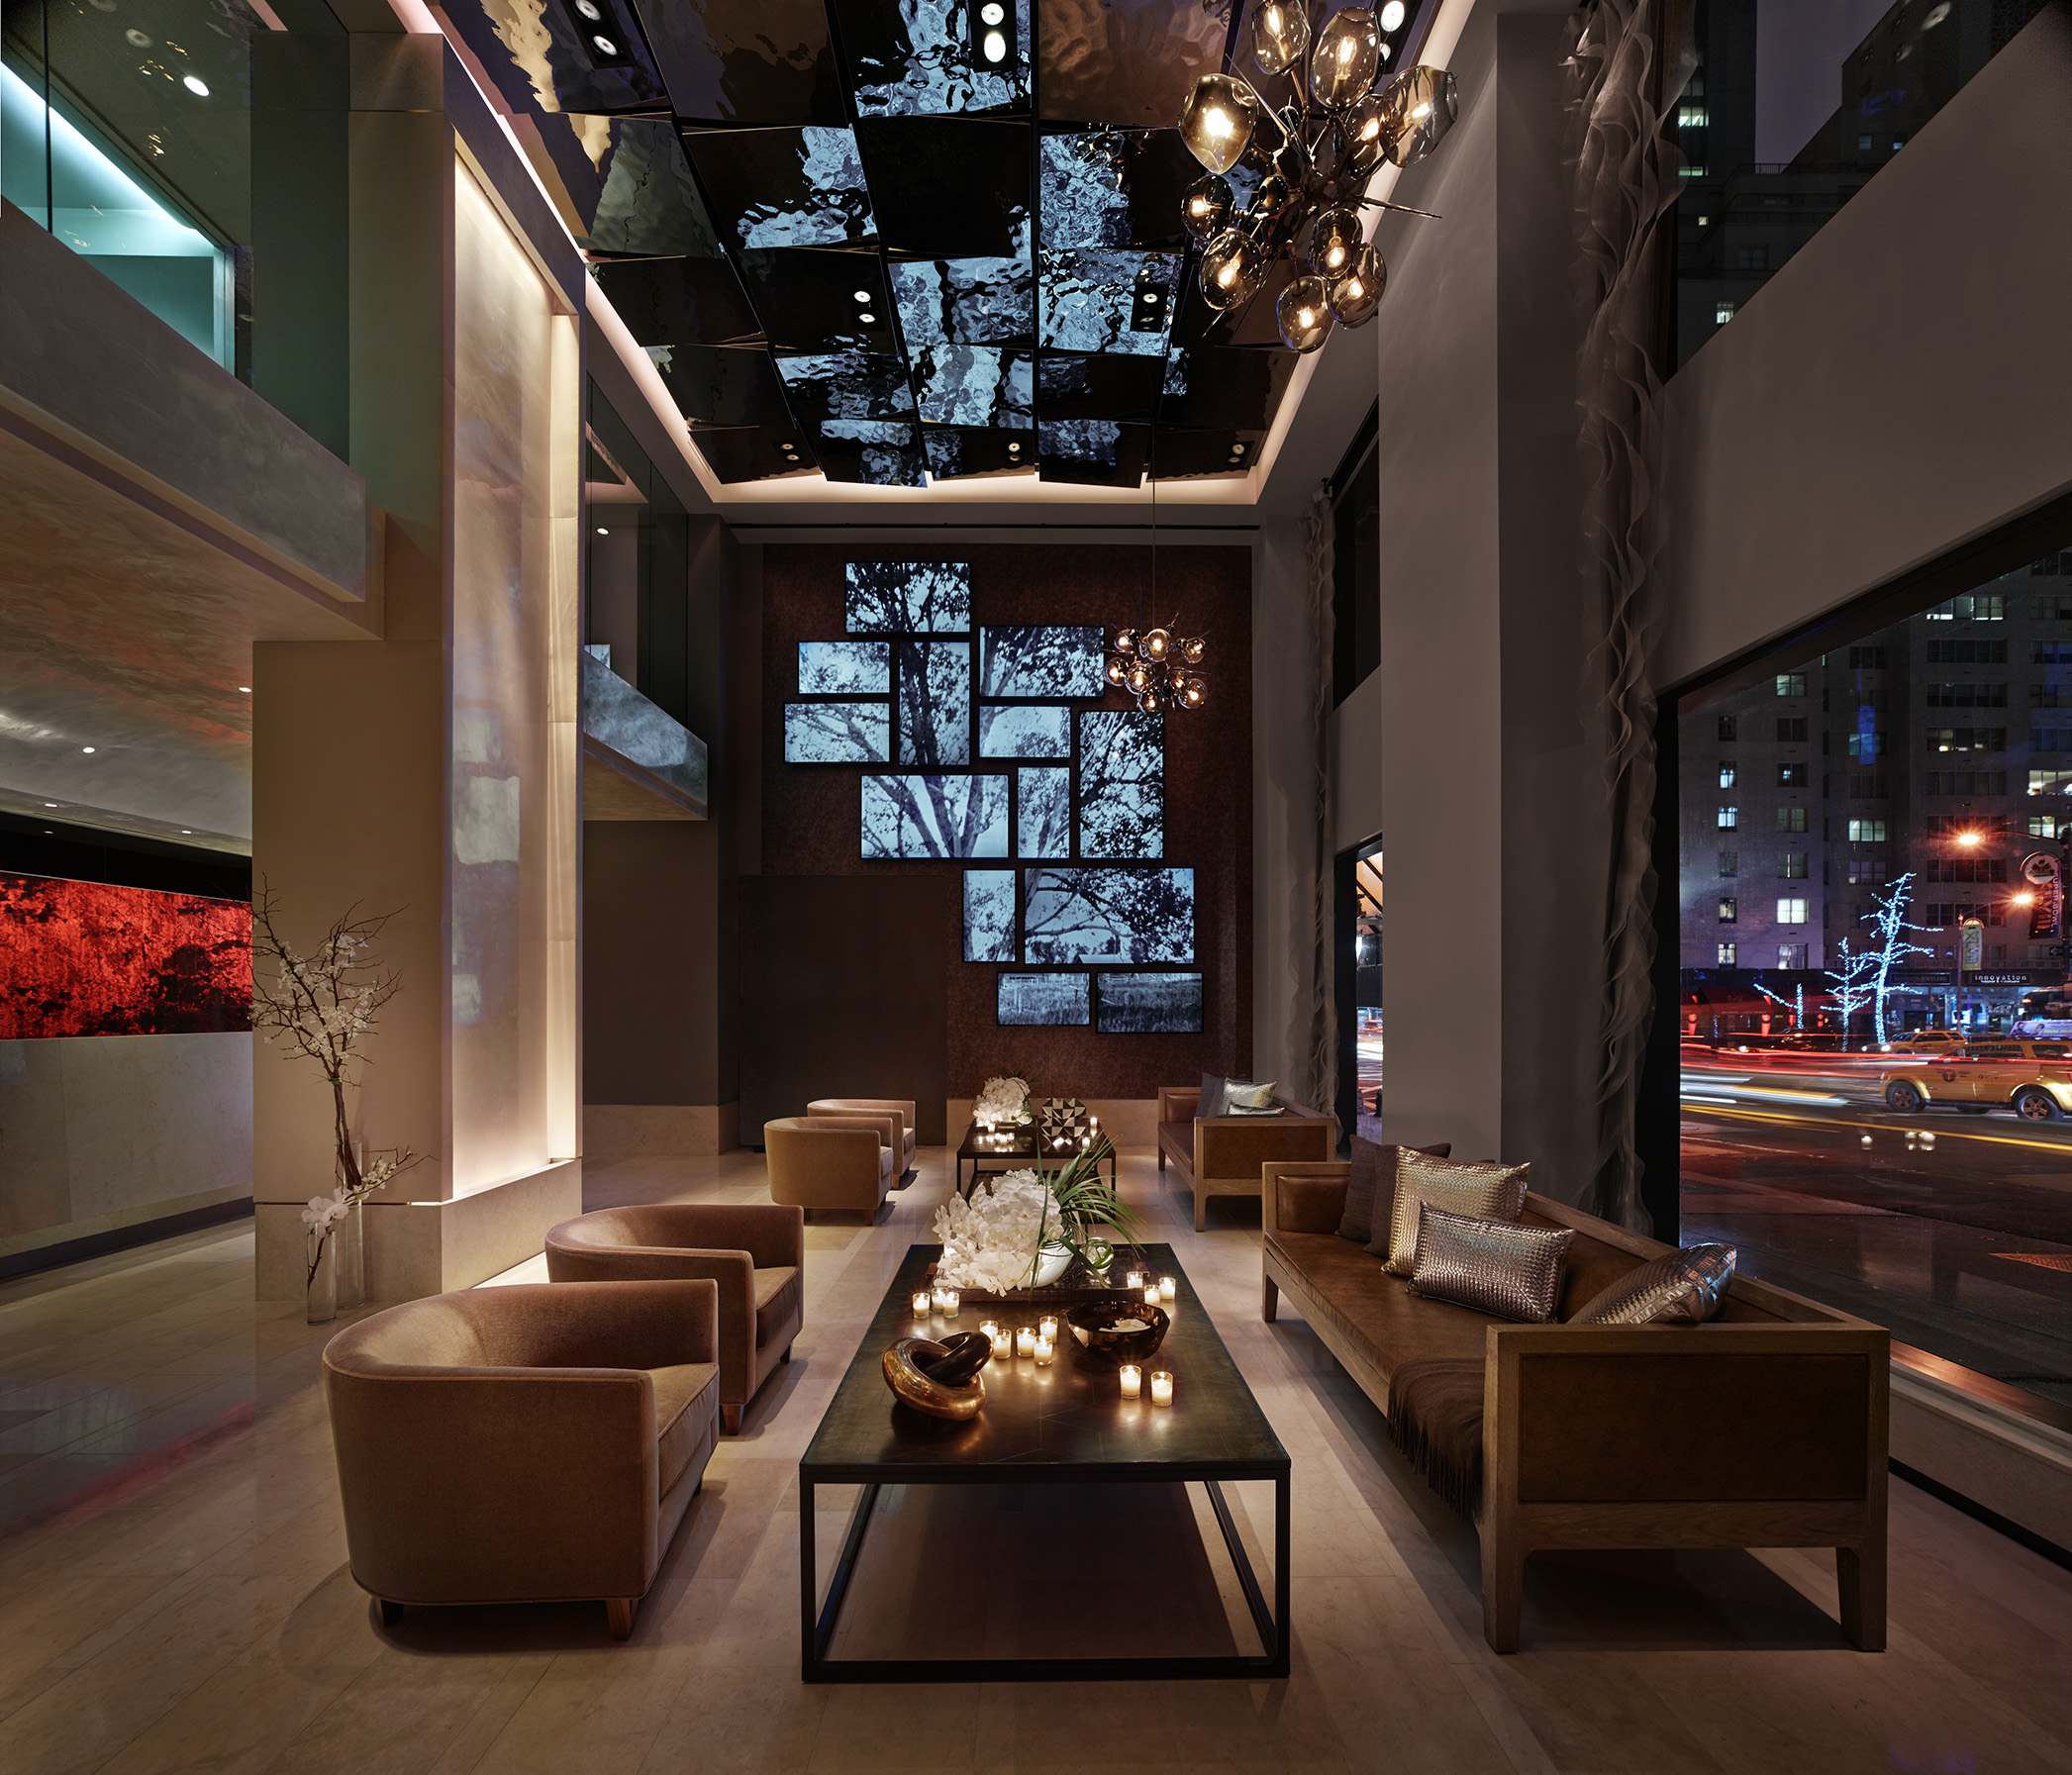 The Quin - A Central Park Hotel, is New York City’s newest luxury lifestyle hotel.